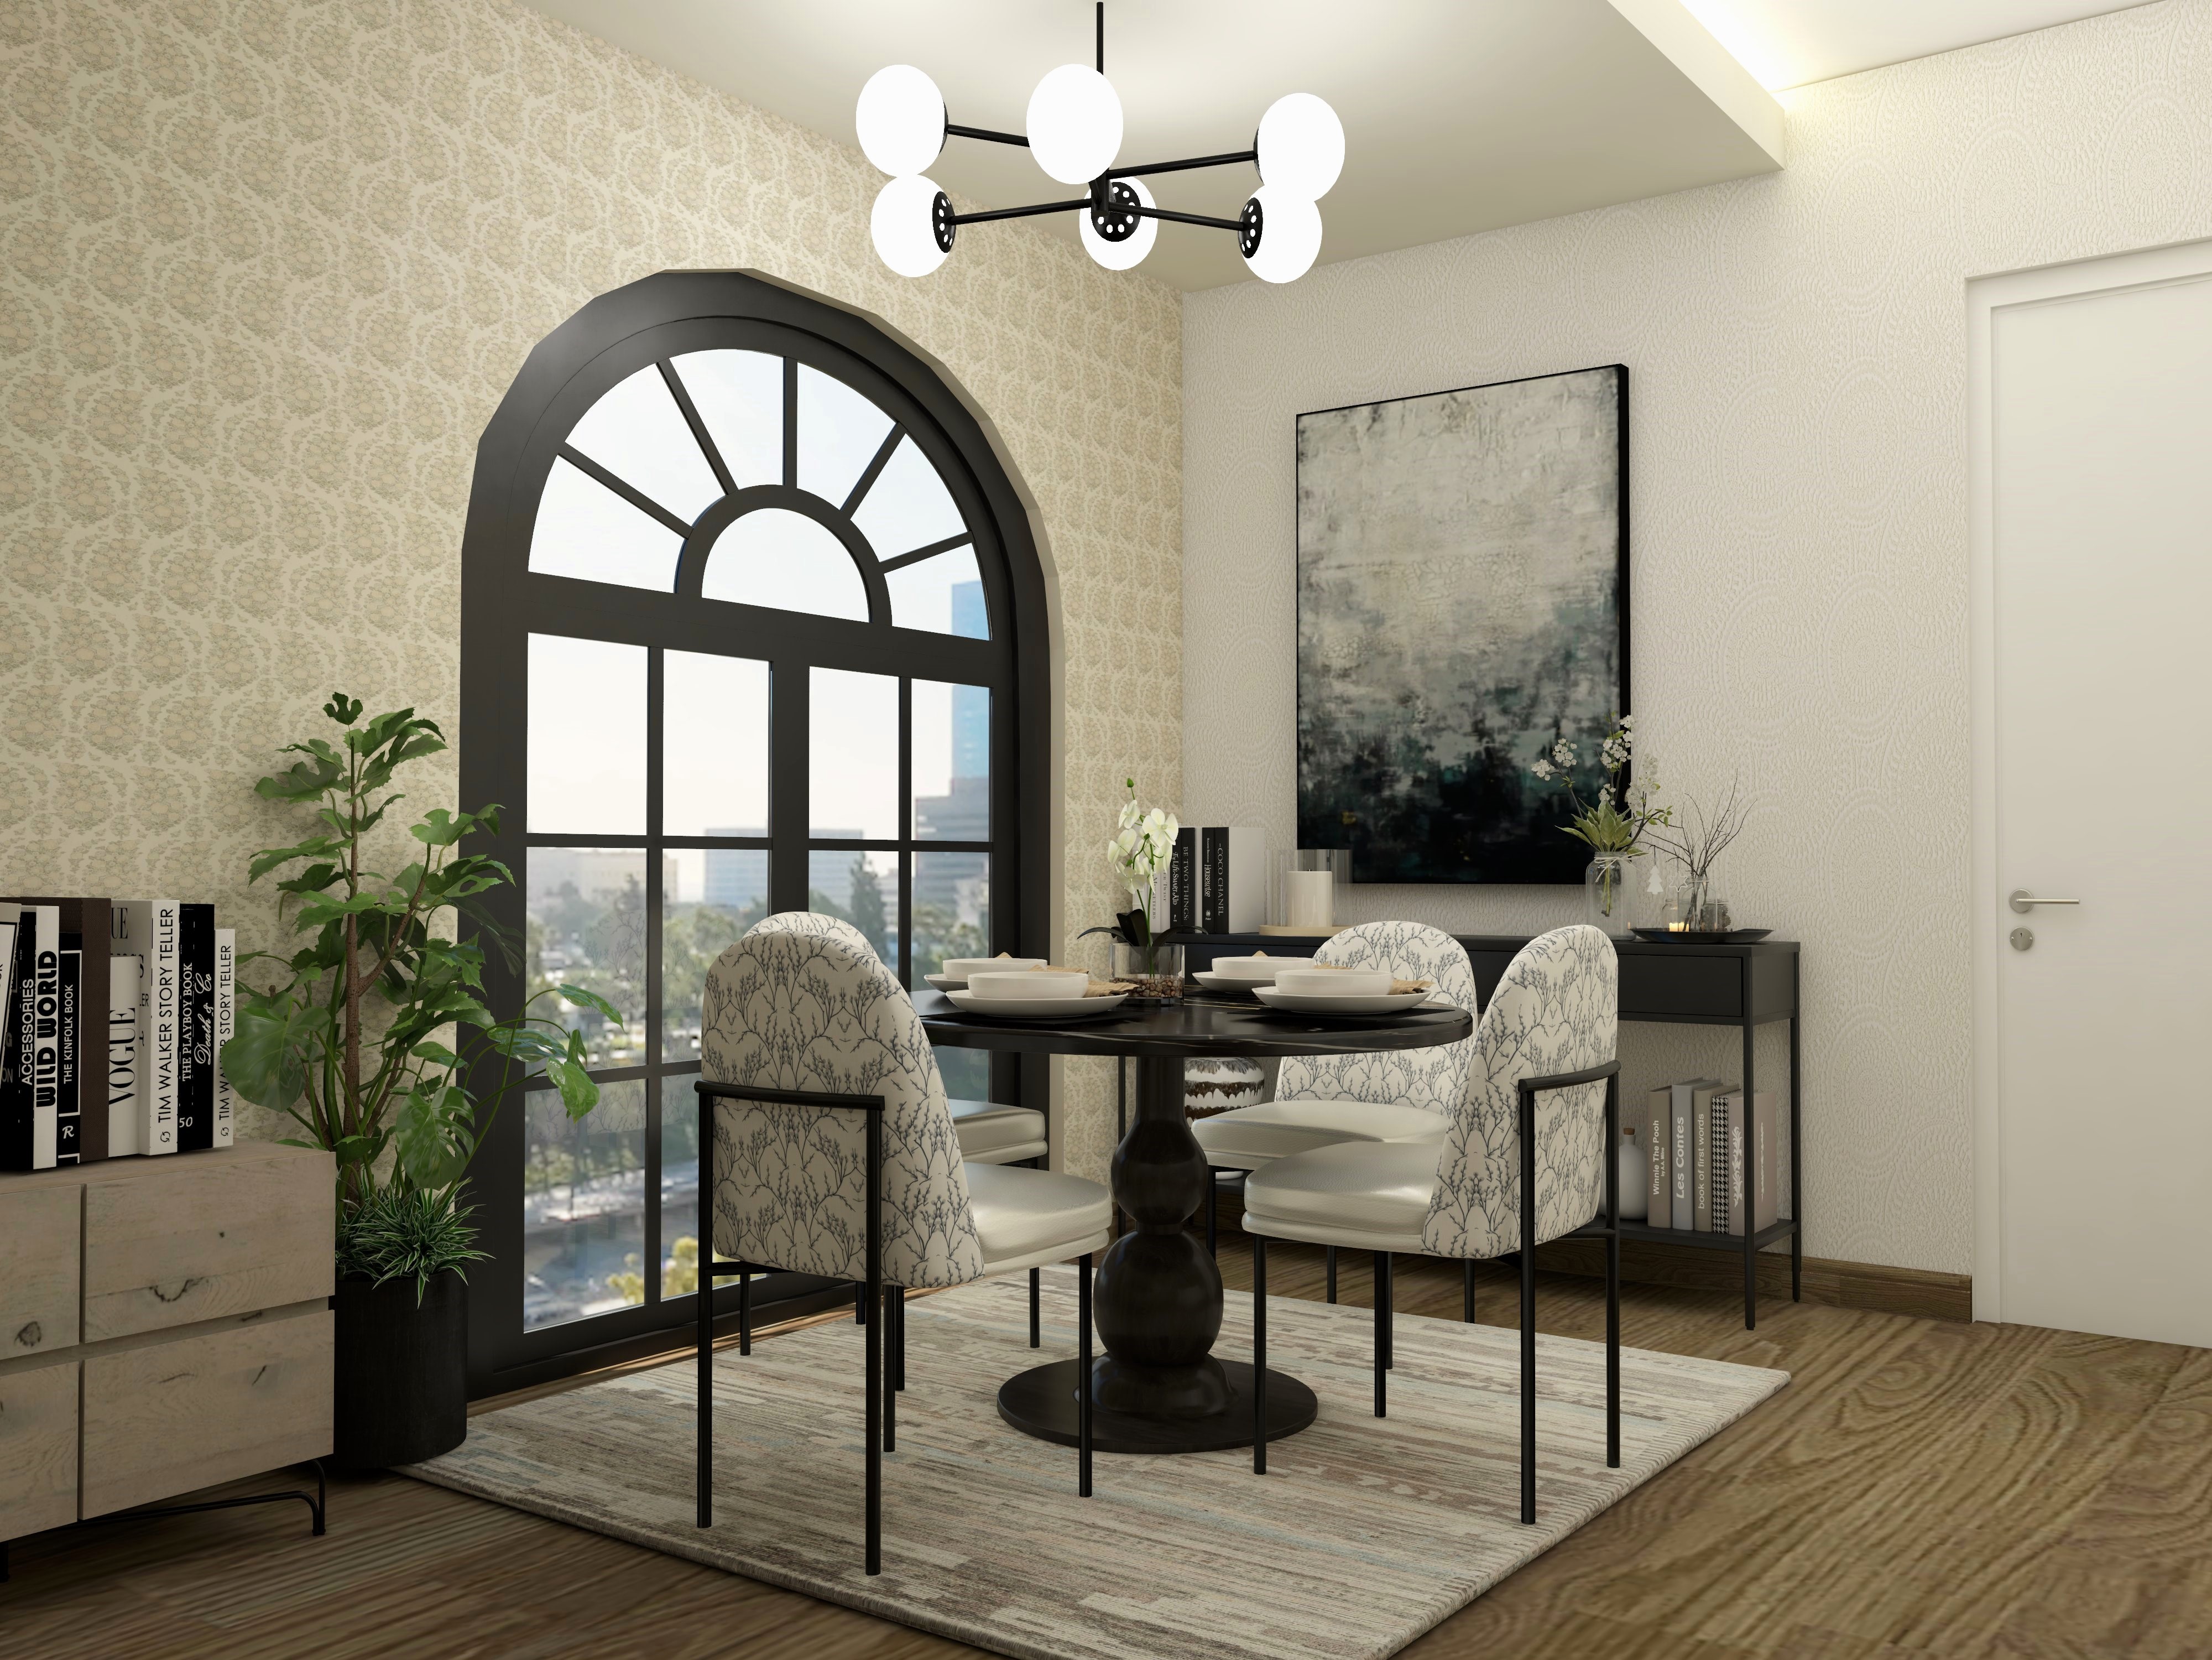 Luxury 4 seater dining table with white printed upholstered chairs - Beautiful Homes